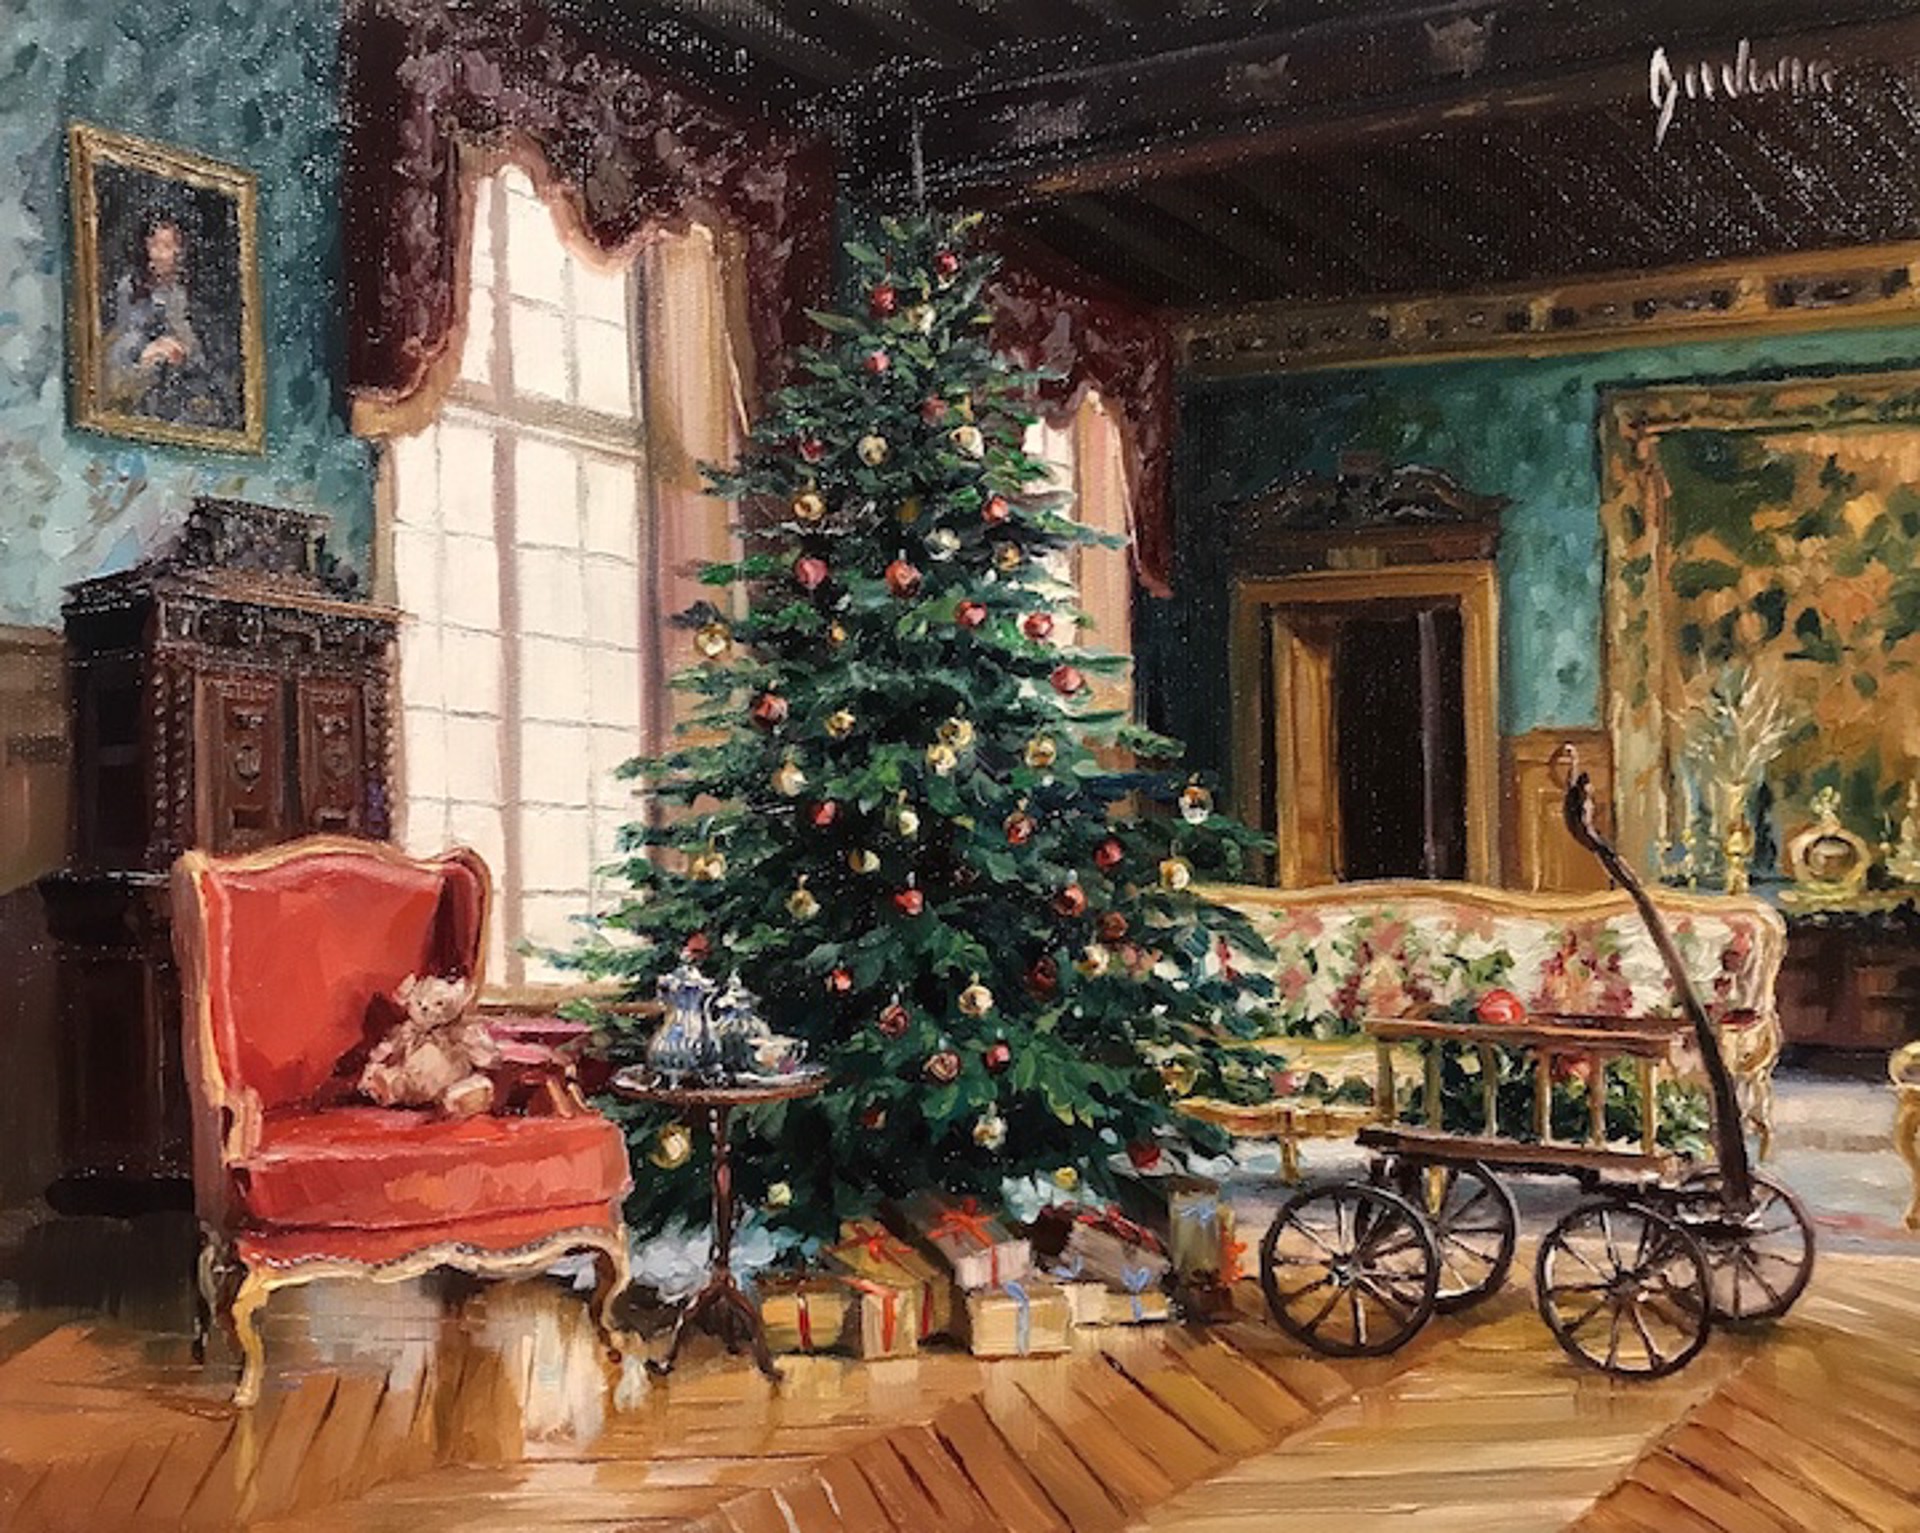 Christmas at Chateau de Thoiry